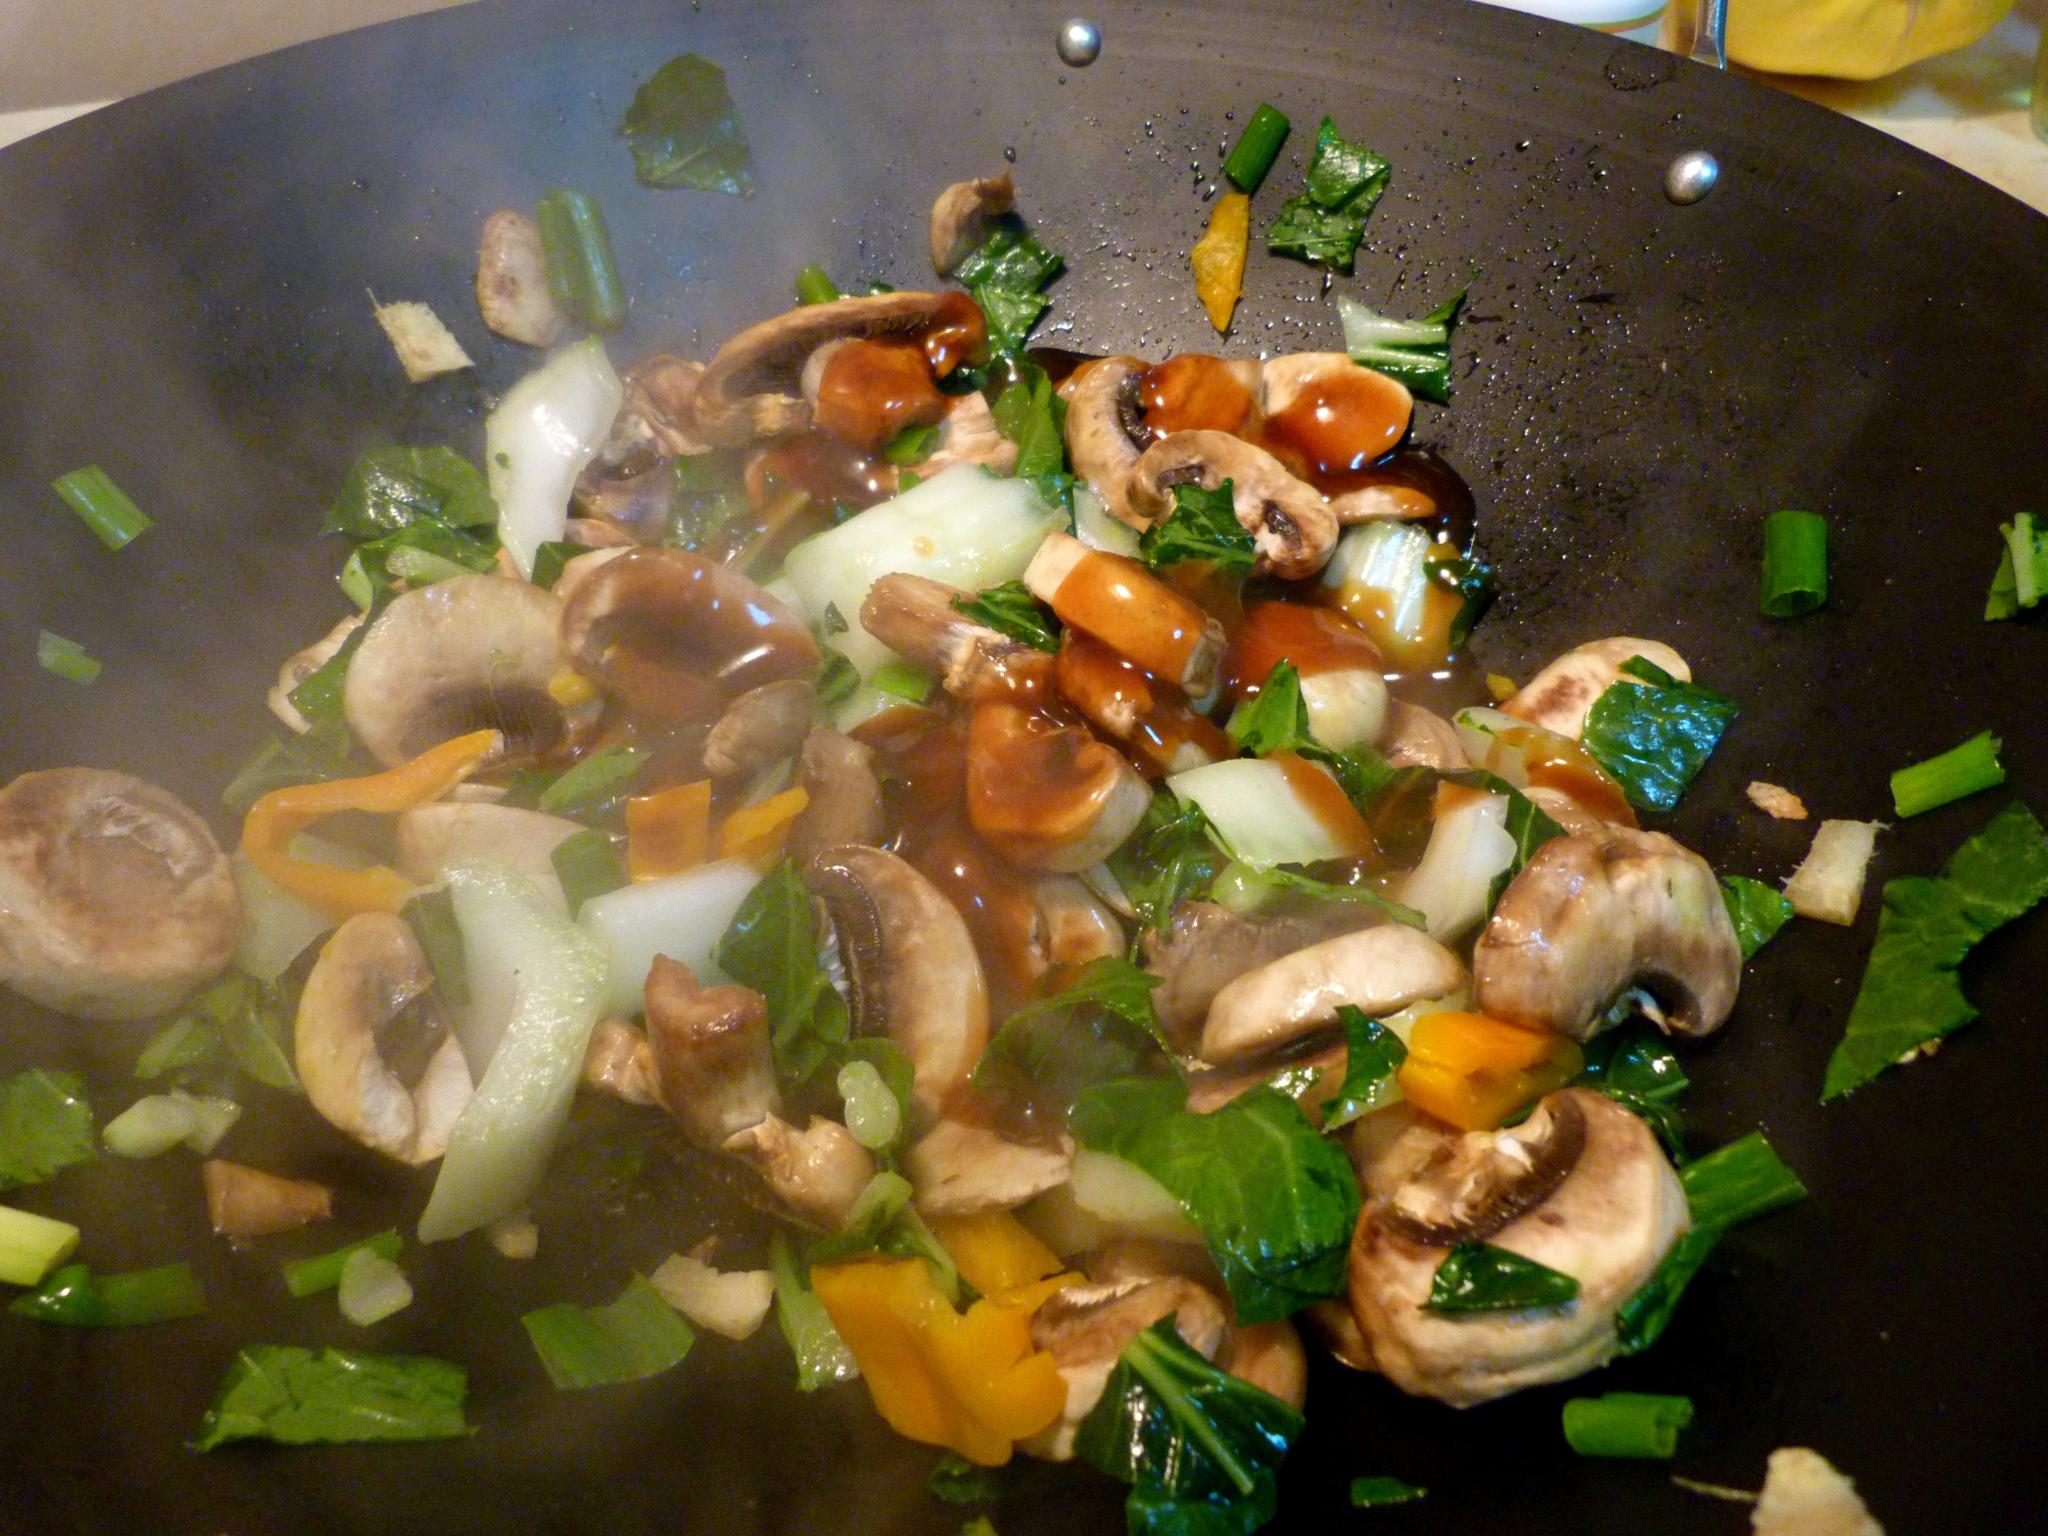 mushrooms, carrots, cucumber and other vegetables being cooked in a pan